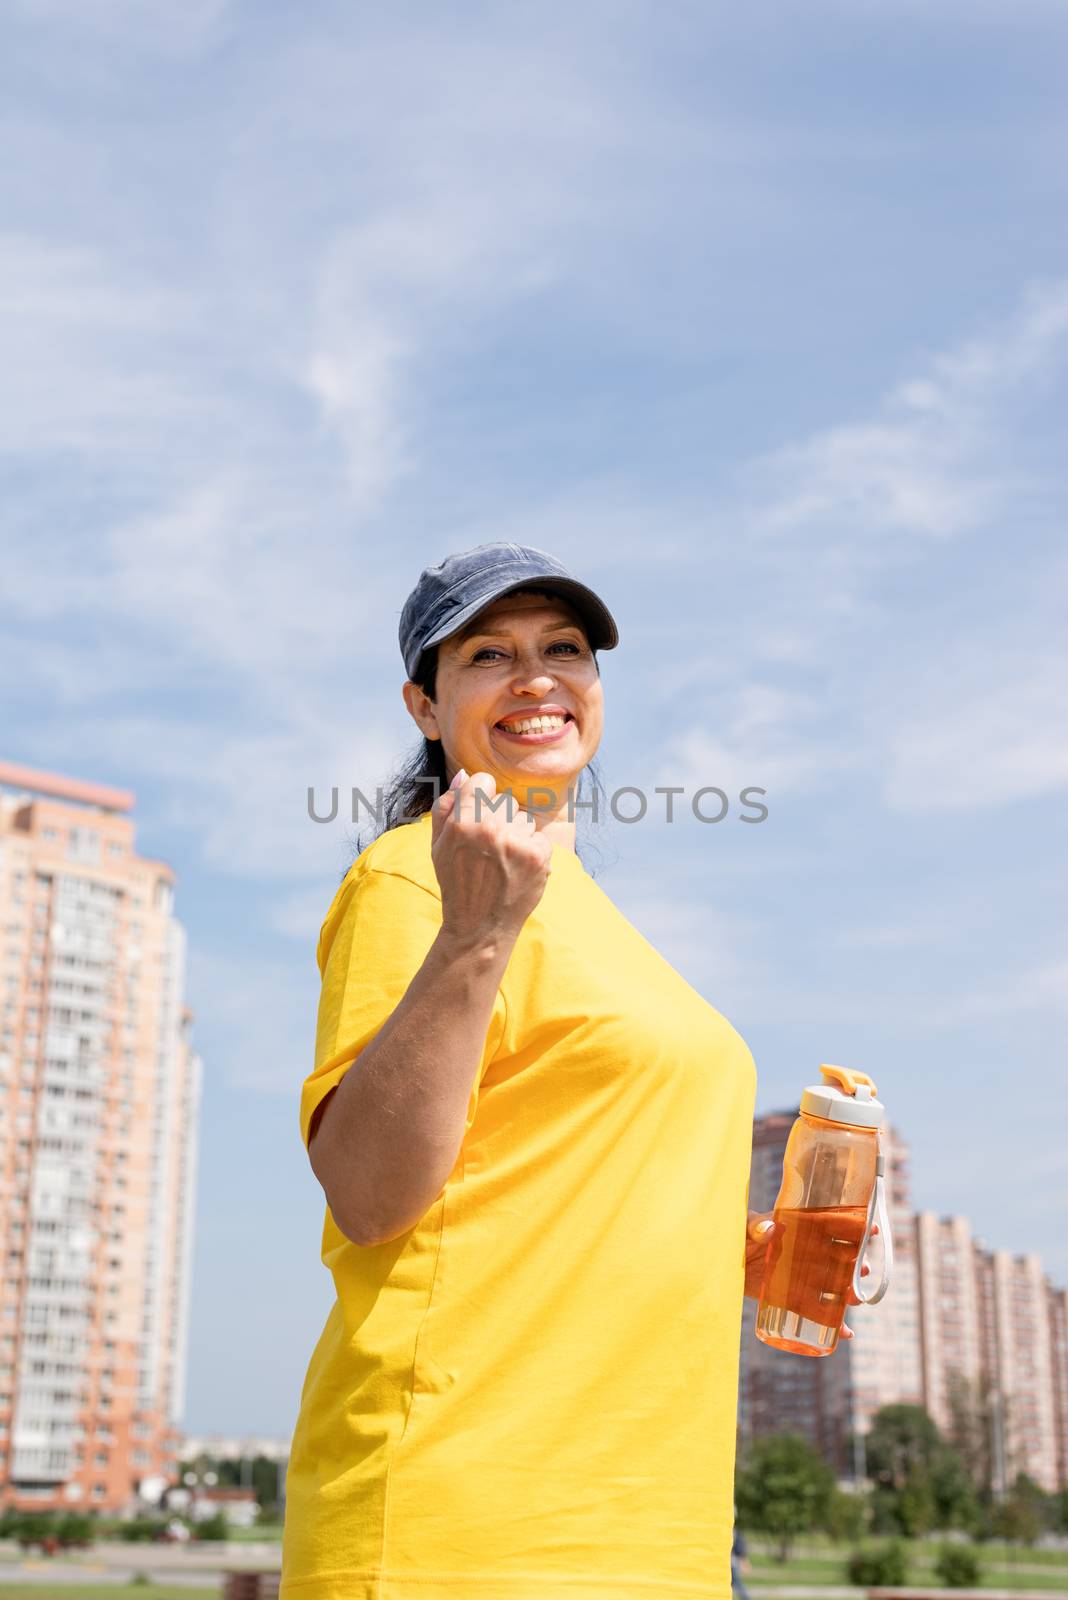 Sport and fitness. Senior sport. Active seniors. Excited senior woman drinking water after workout outdoors on the sports ground